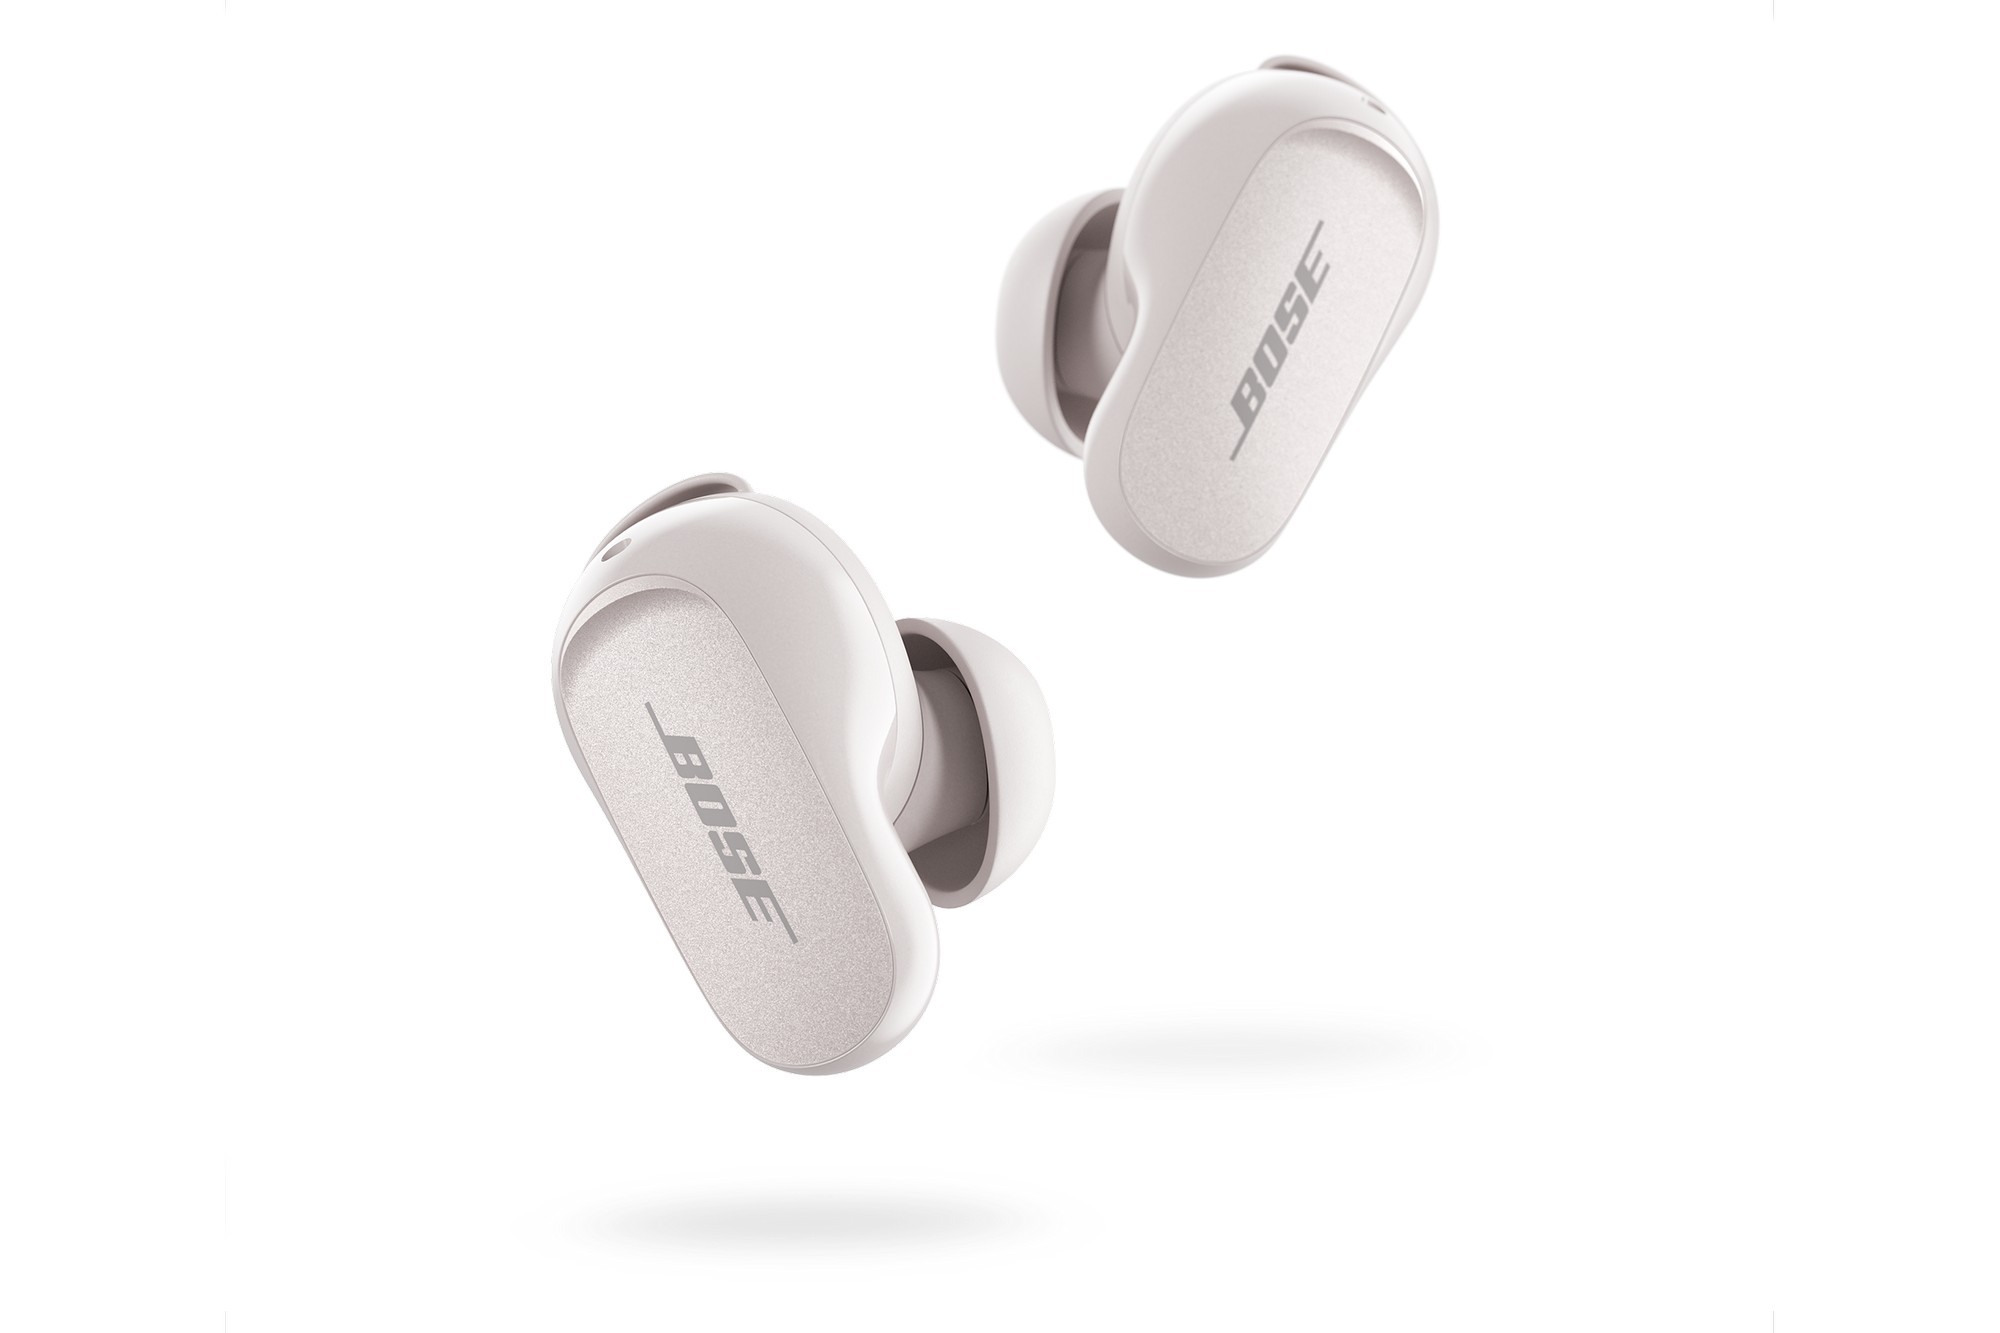 Bose debuts its second-generation QuietComfort earbuds | TechHive